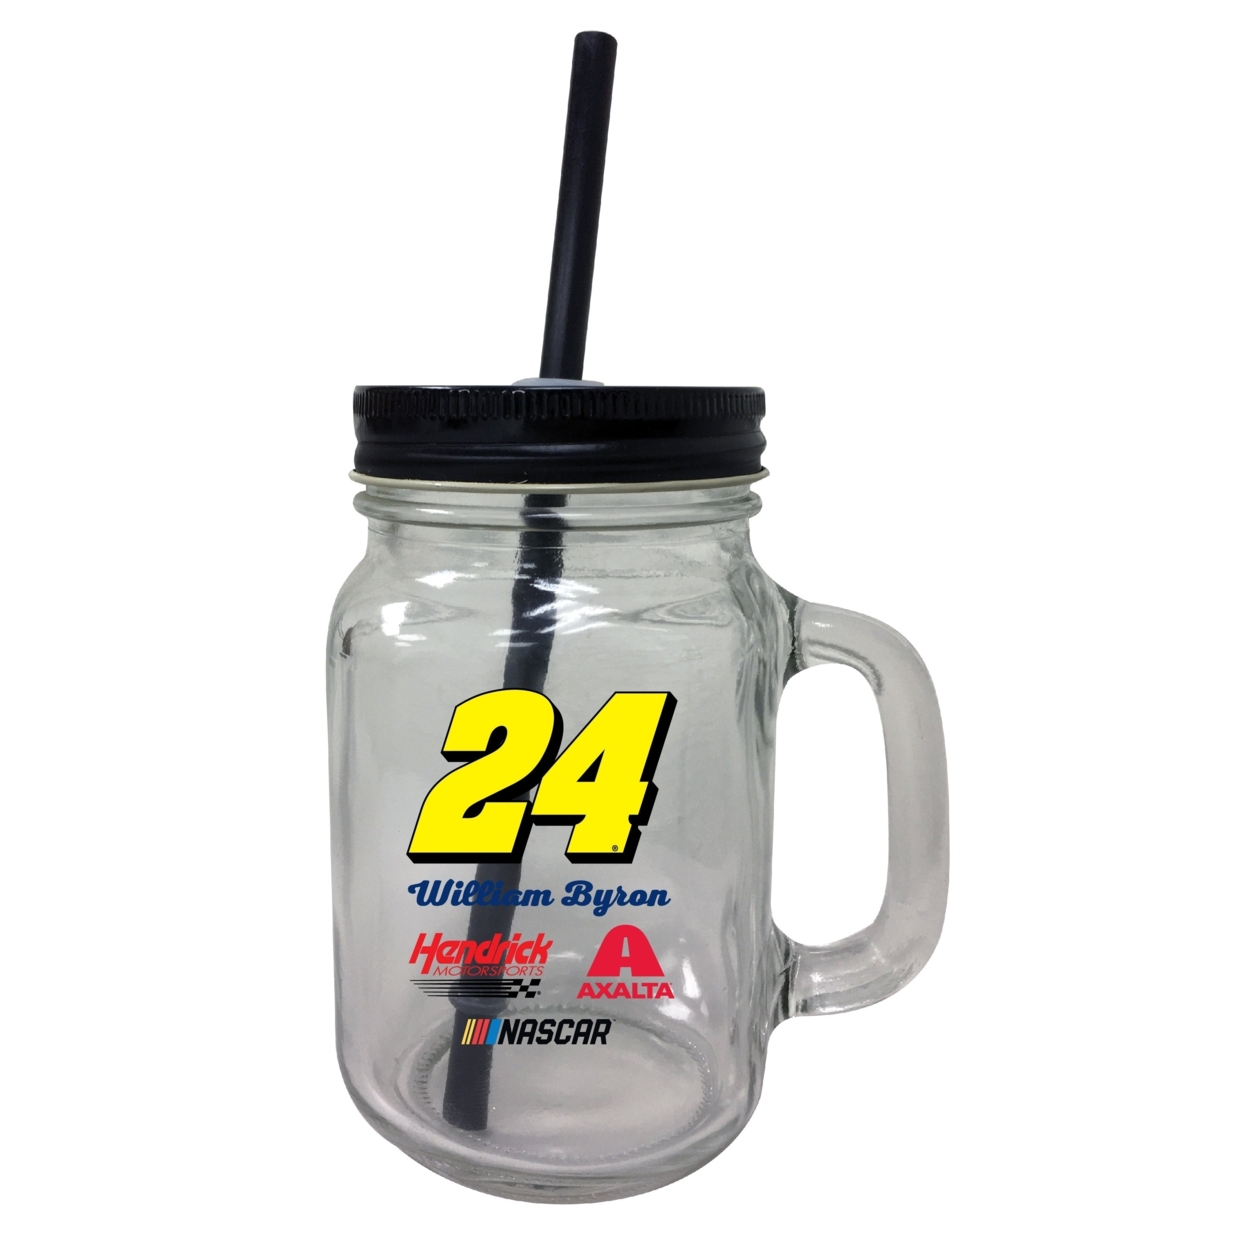 R and R Imports Officially Licensed NASCAR William Byron 24 Jar Tumbler  for 2020